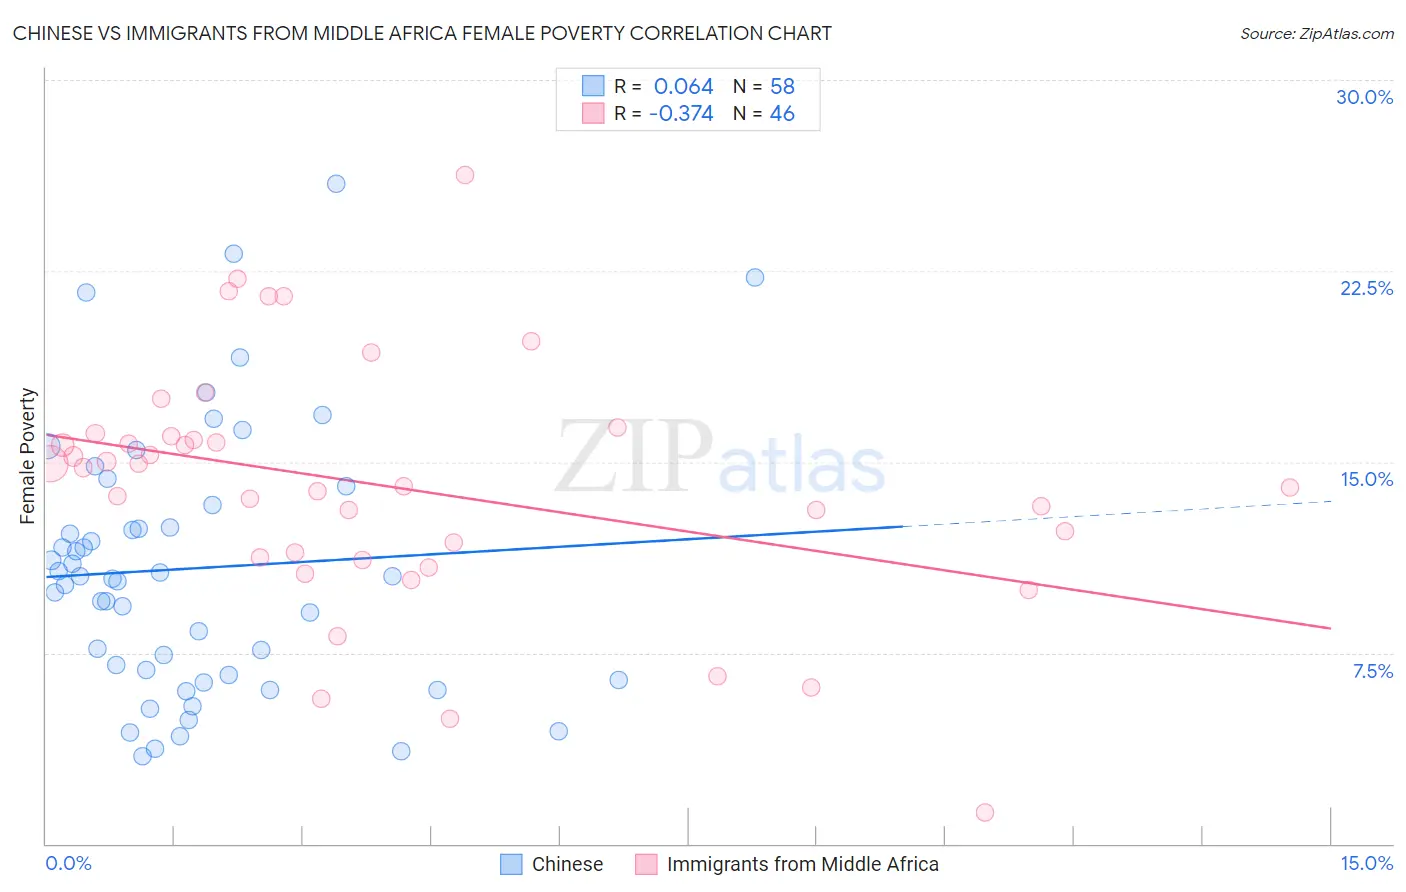 Chinese vs Immigrants from Middle Africa Female Poverty